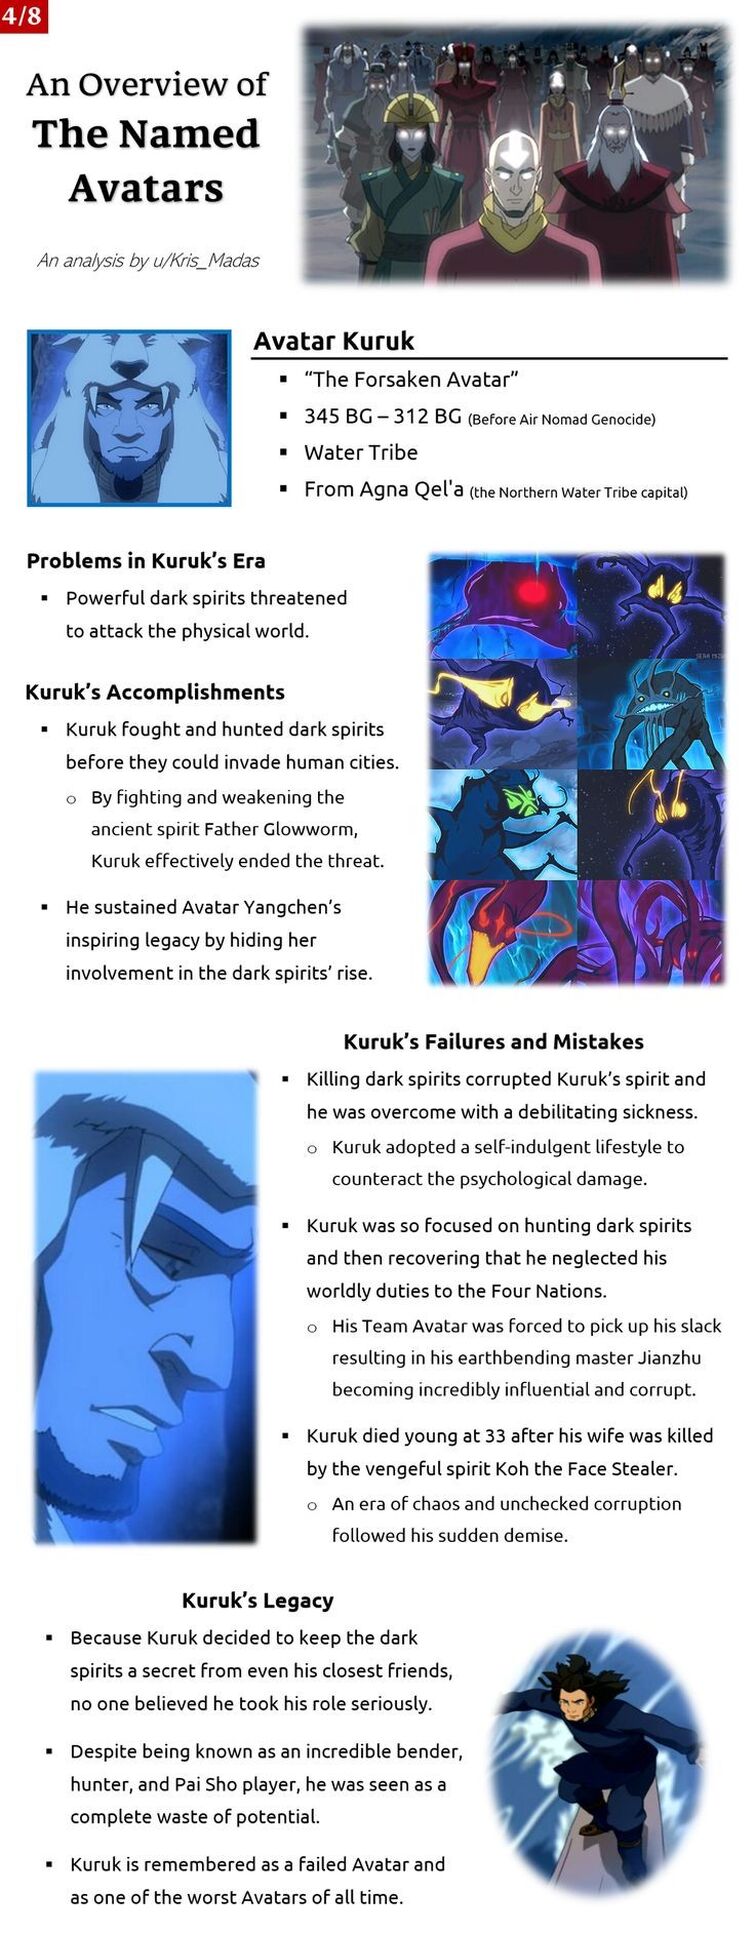 An Overview of The Named Avatars An analysis by Madas Avatar